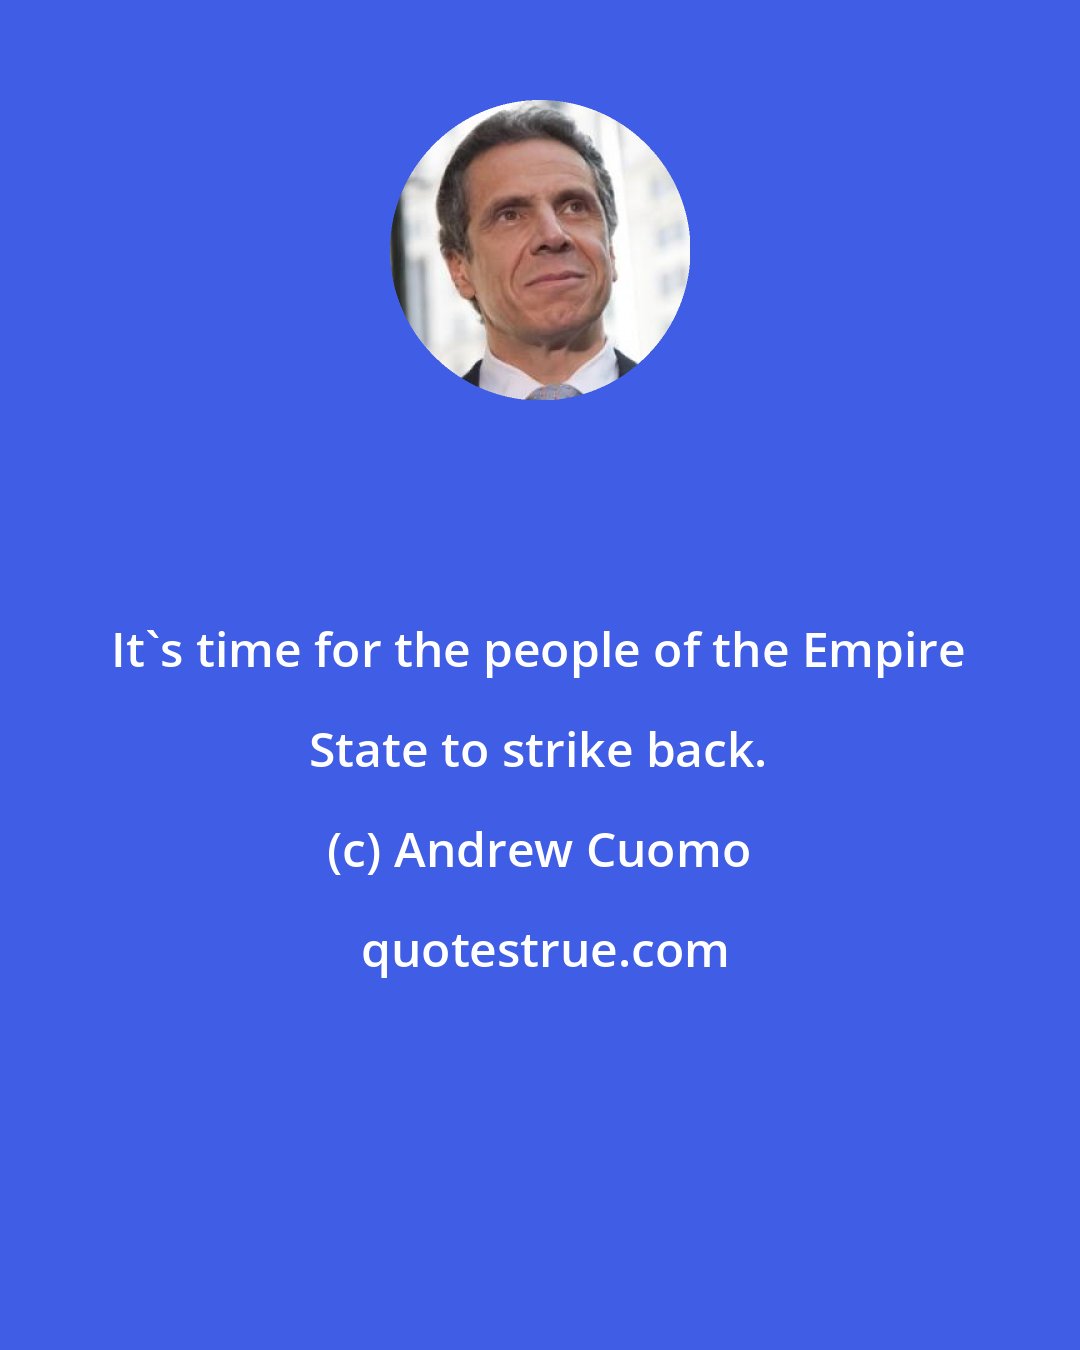 Andrew Cuomo: It's time for the people of the Empire State to strike back.